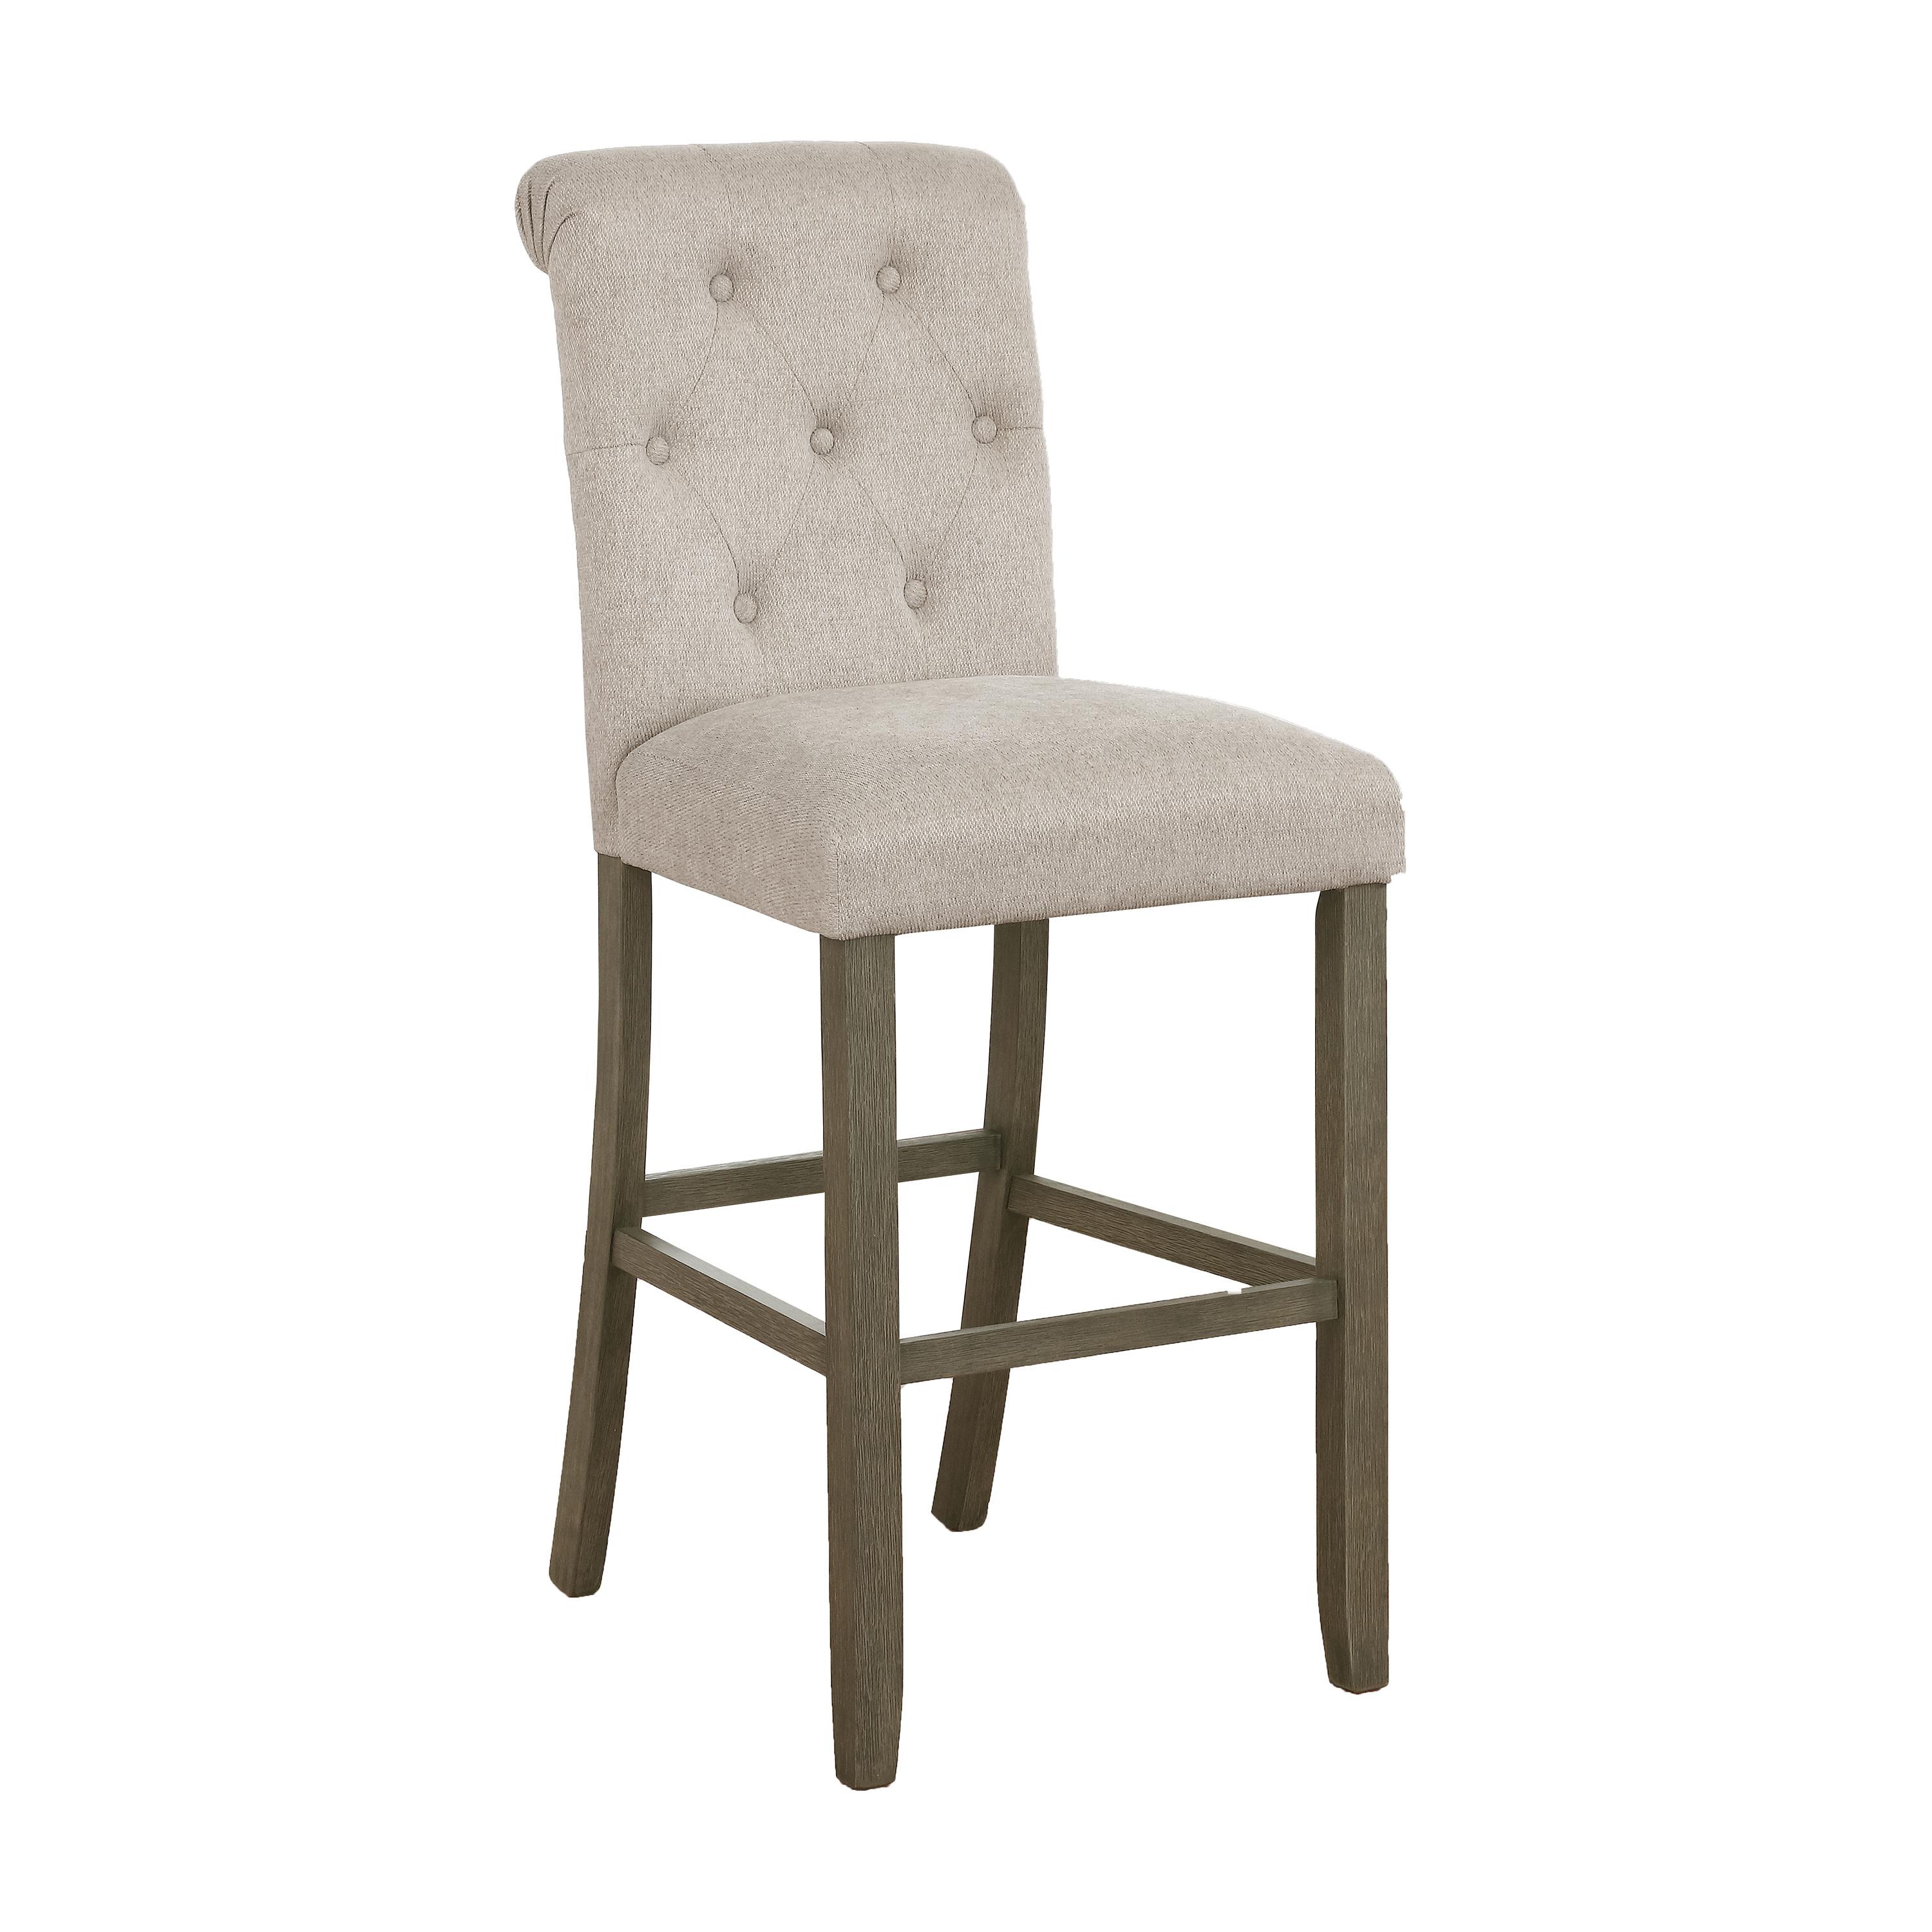 Traditional Bar Stool Set 193169 193169 in Beige 